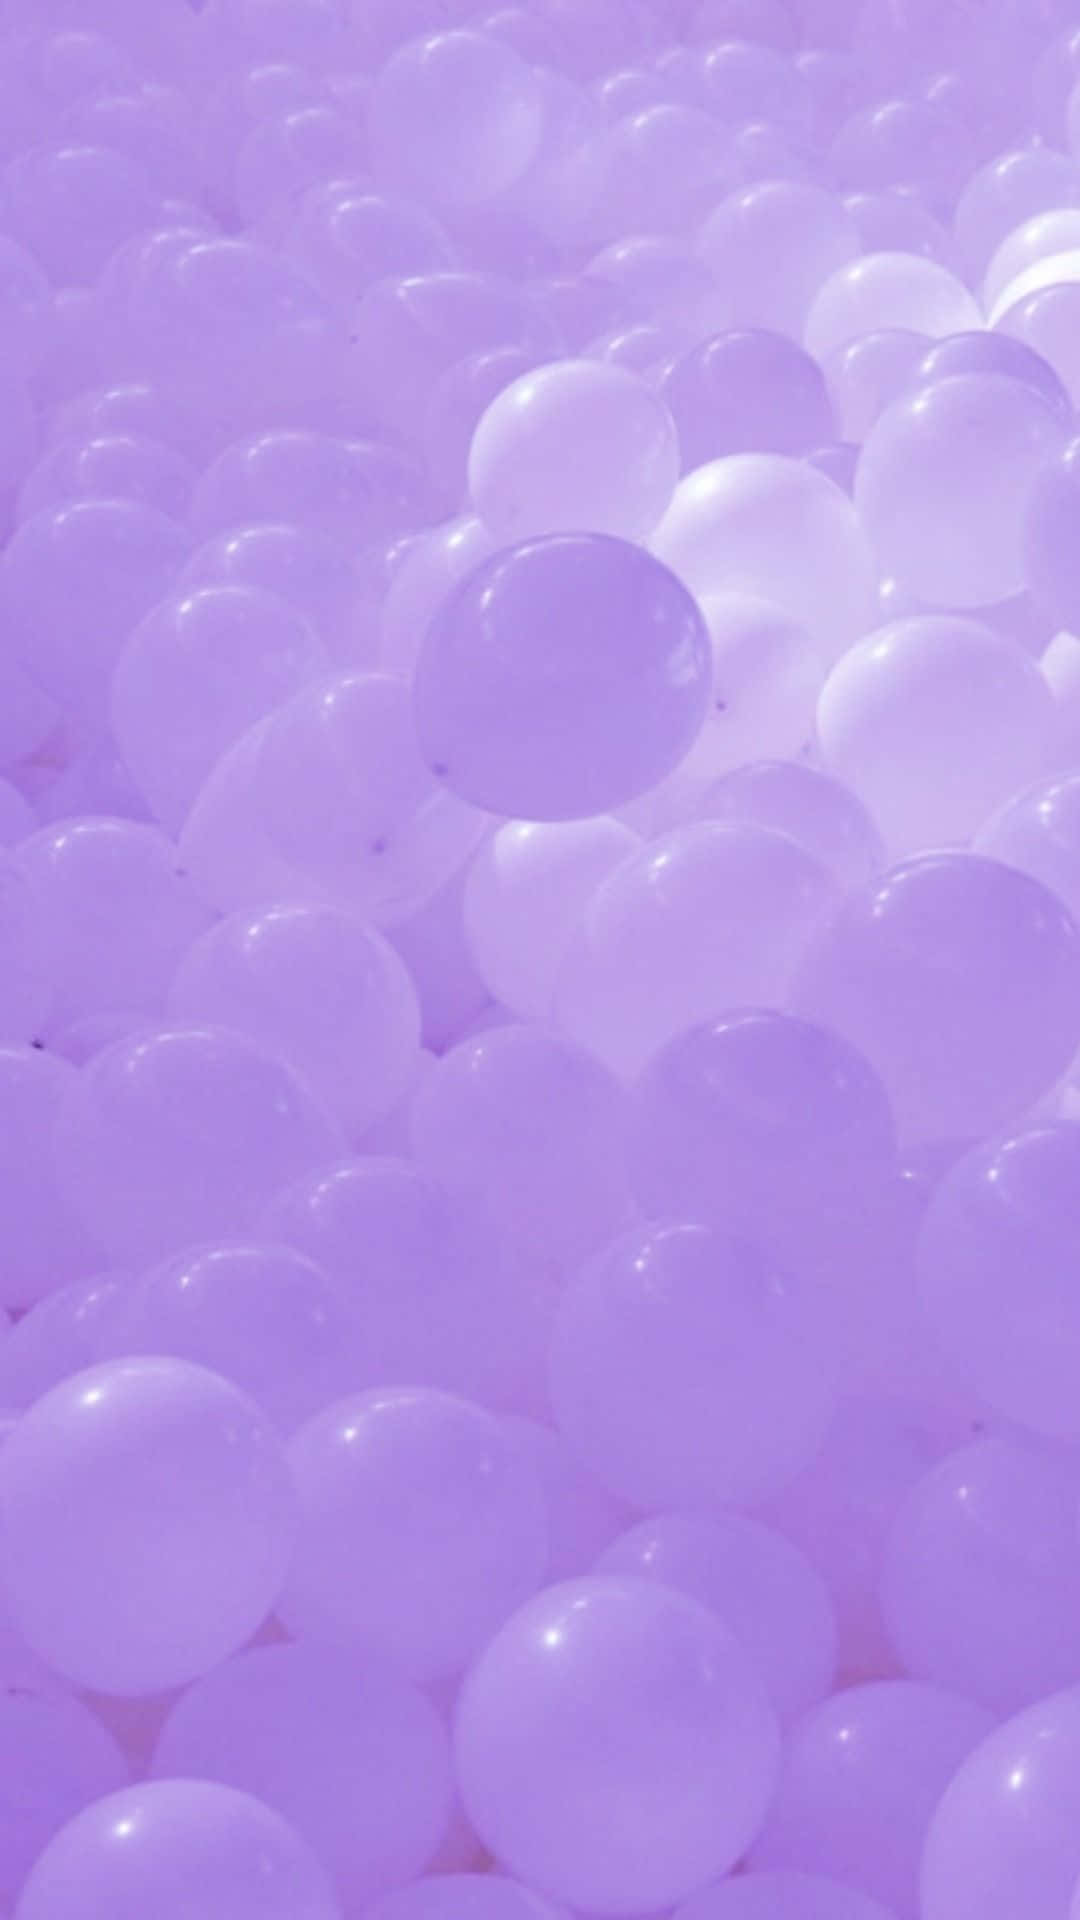 Balloons In Lavender Pastel Purple Aesthetic Background